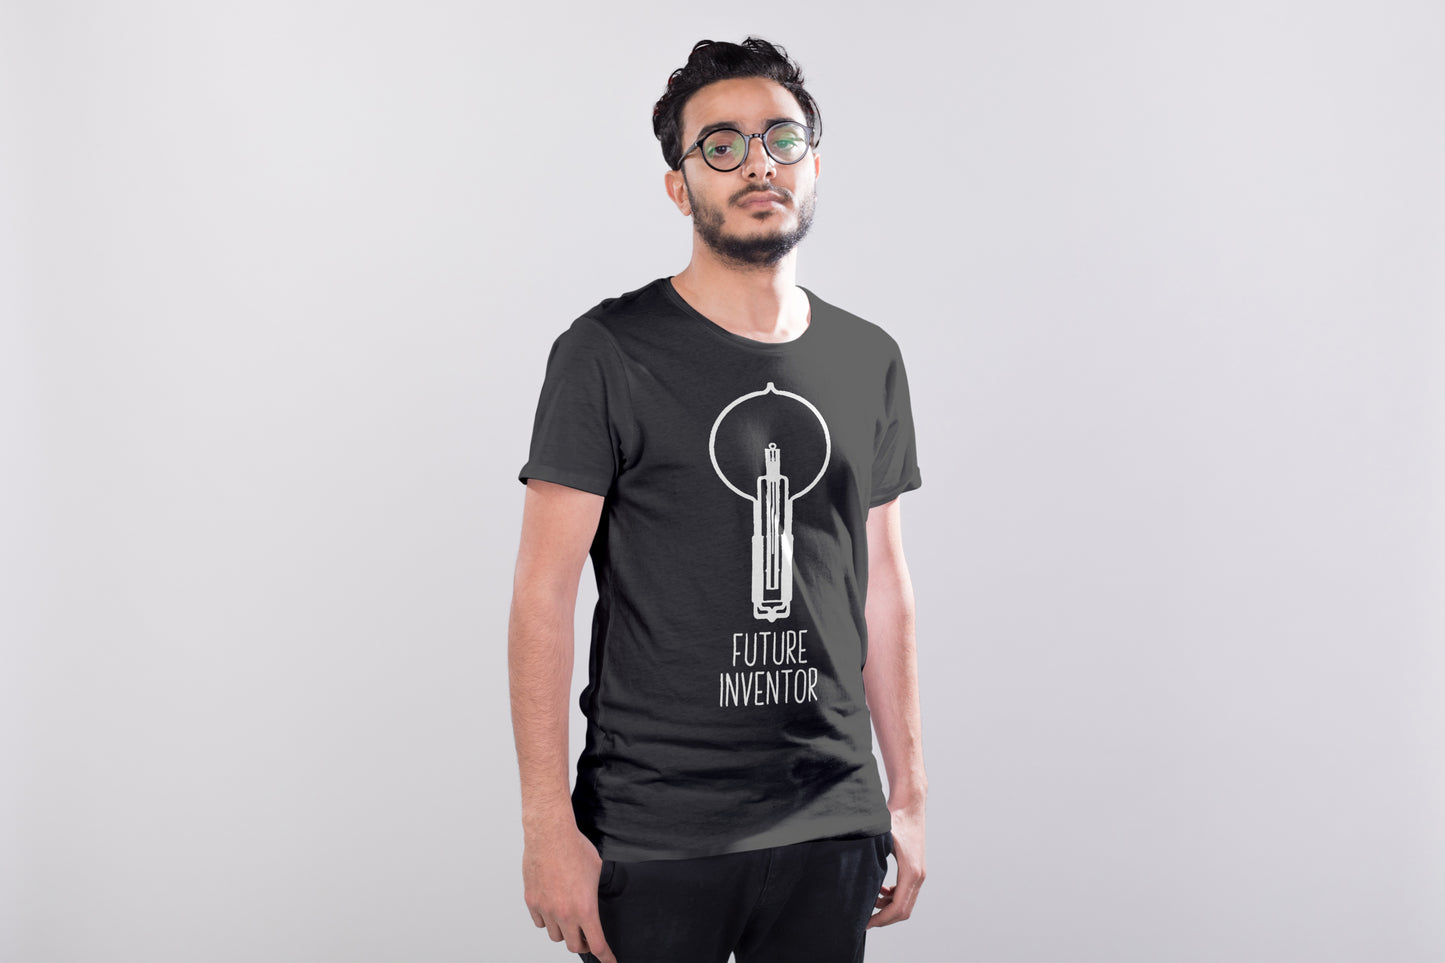 Future Inventor T-shirt for Makers and Creatives